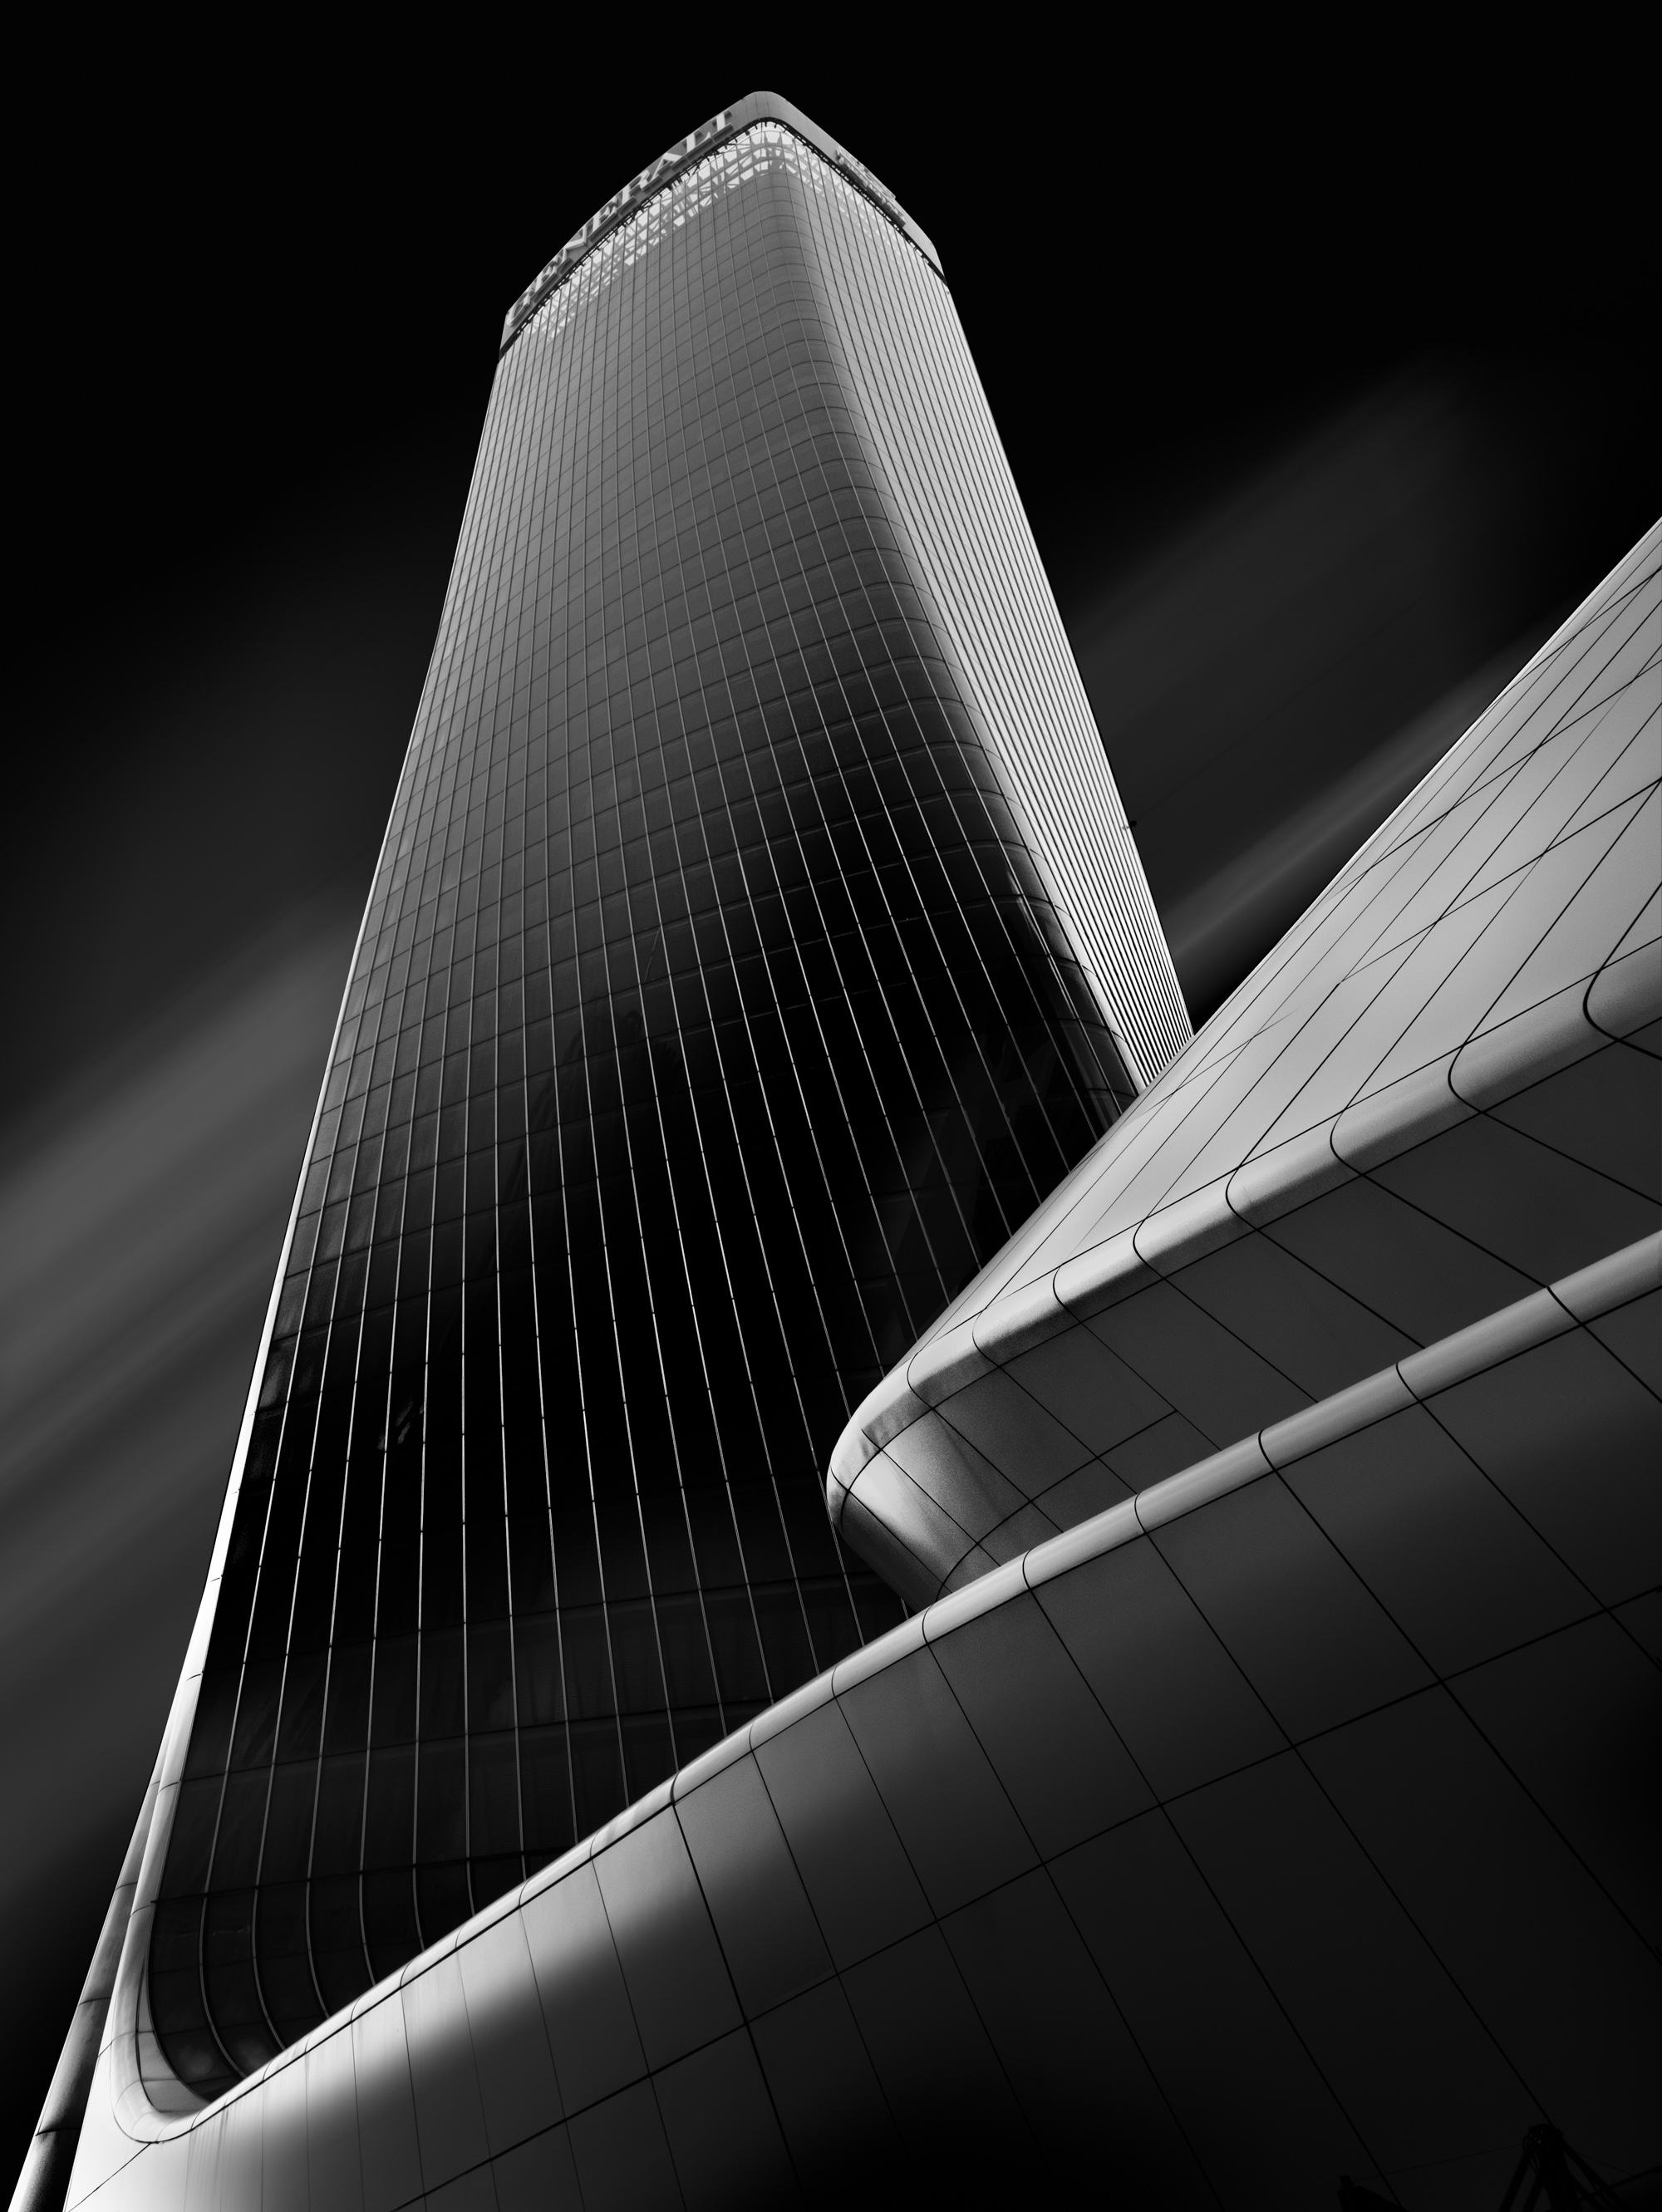 1st Place Generali Tower Milan By Mark Reeves